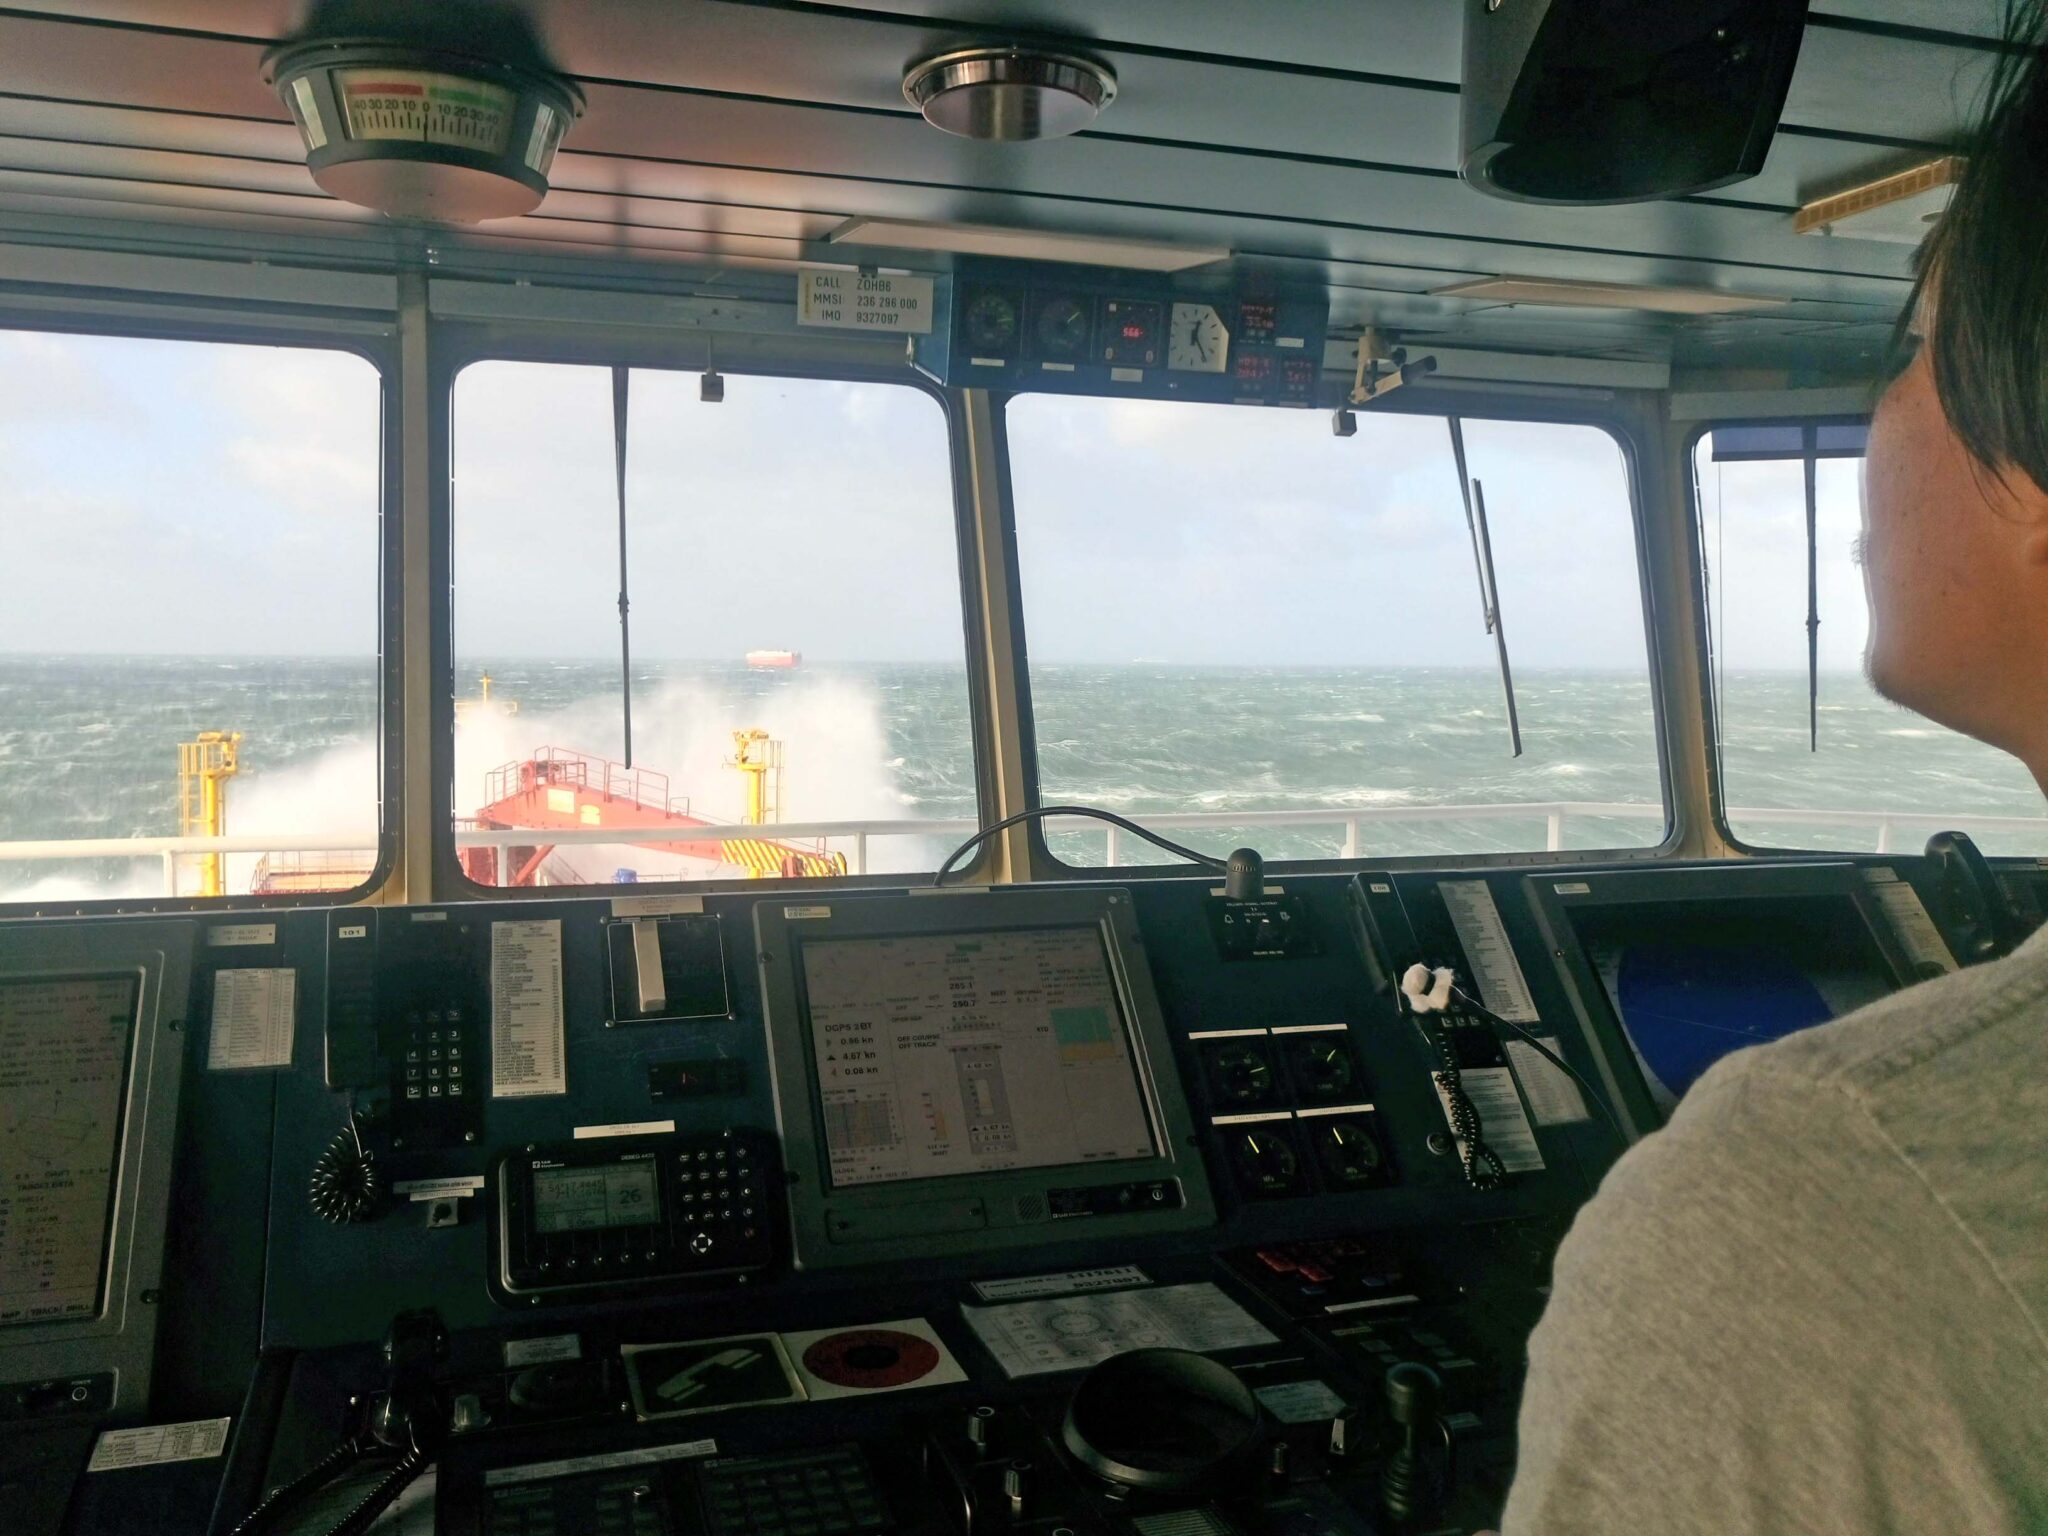 Helmsman on a very rough weather.